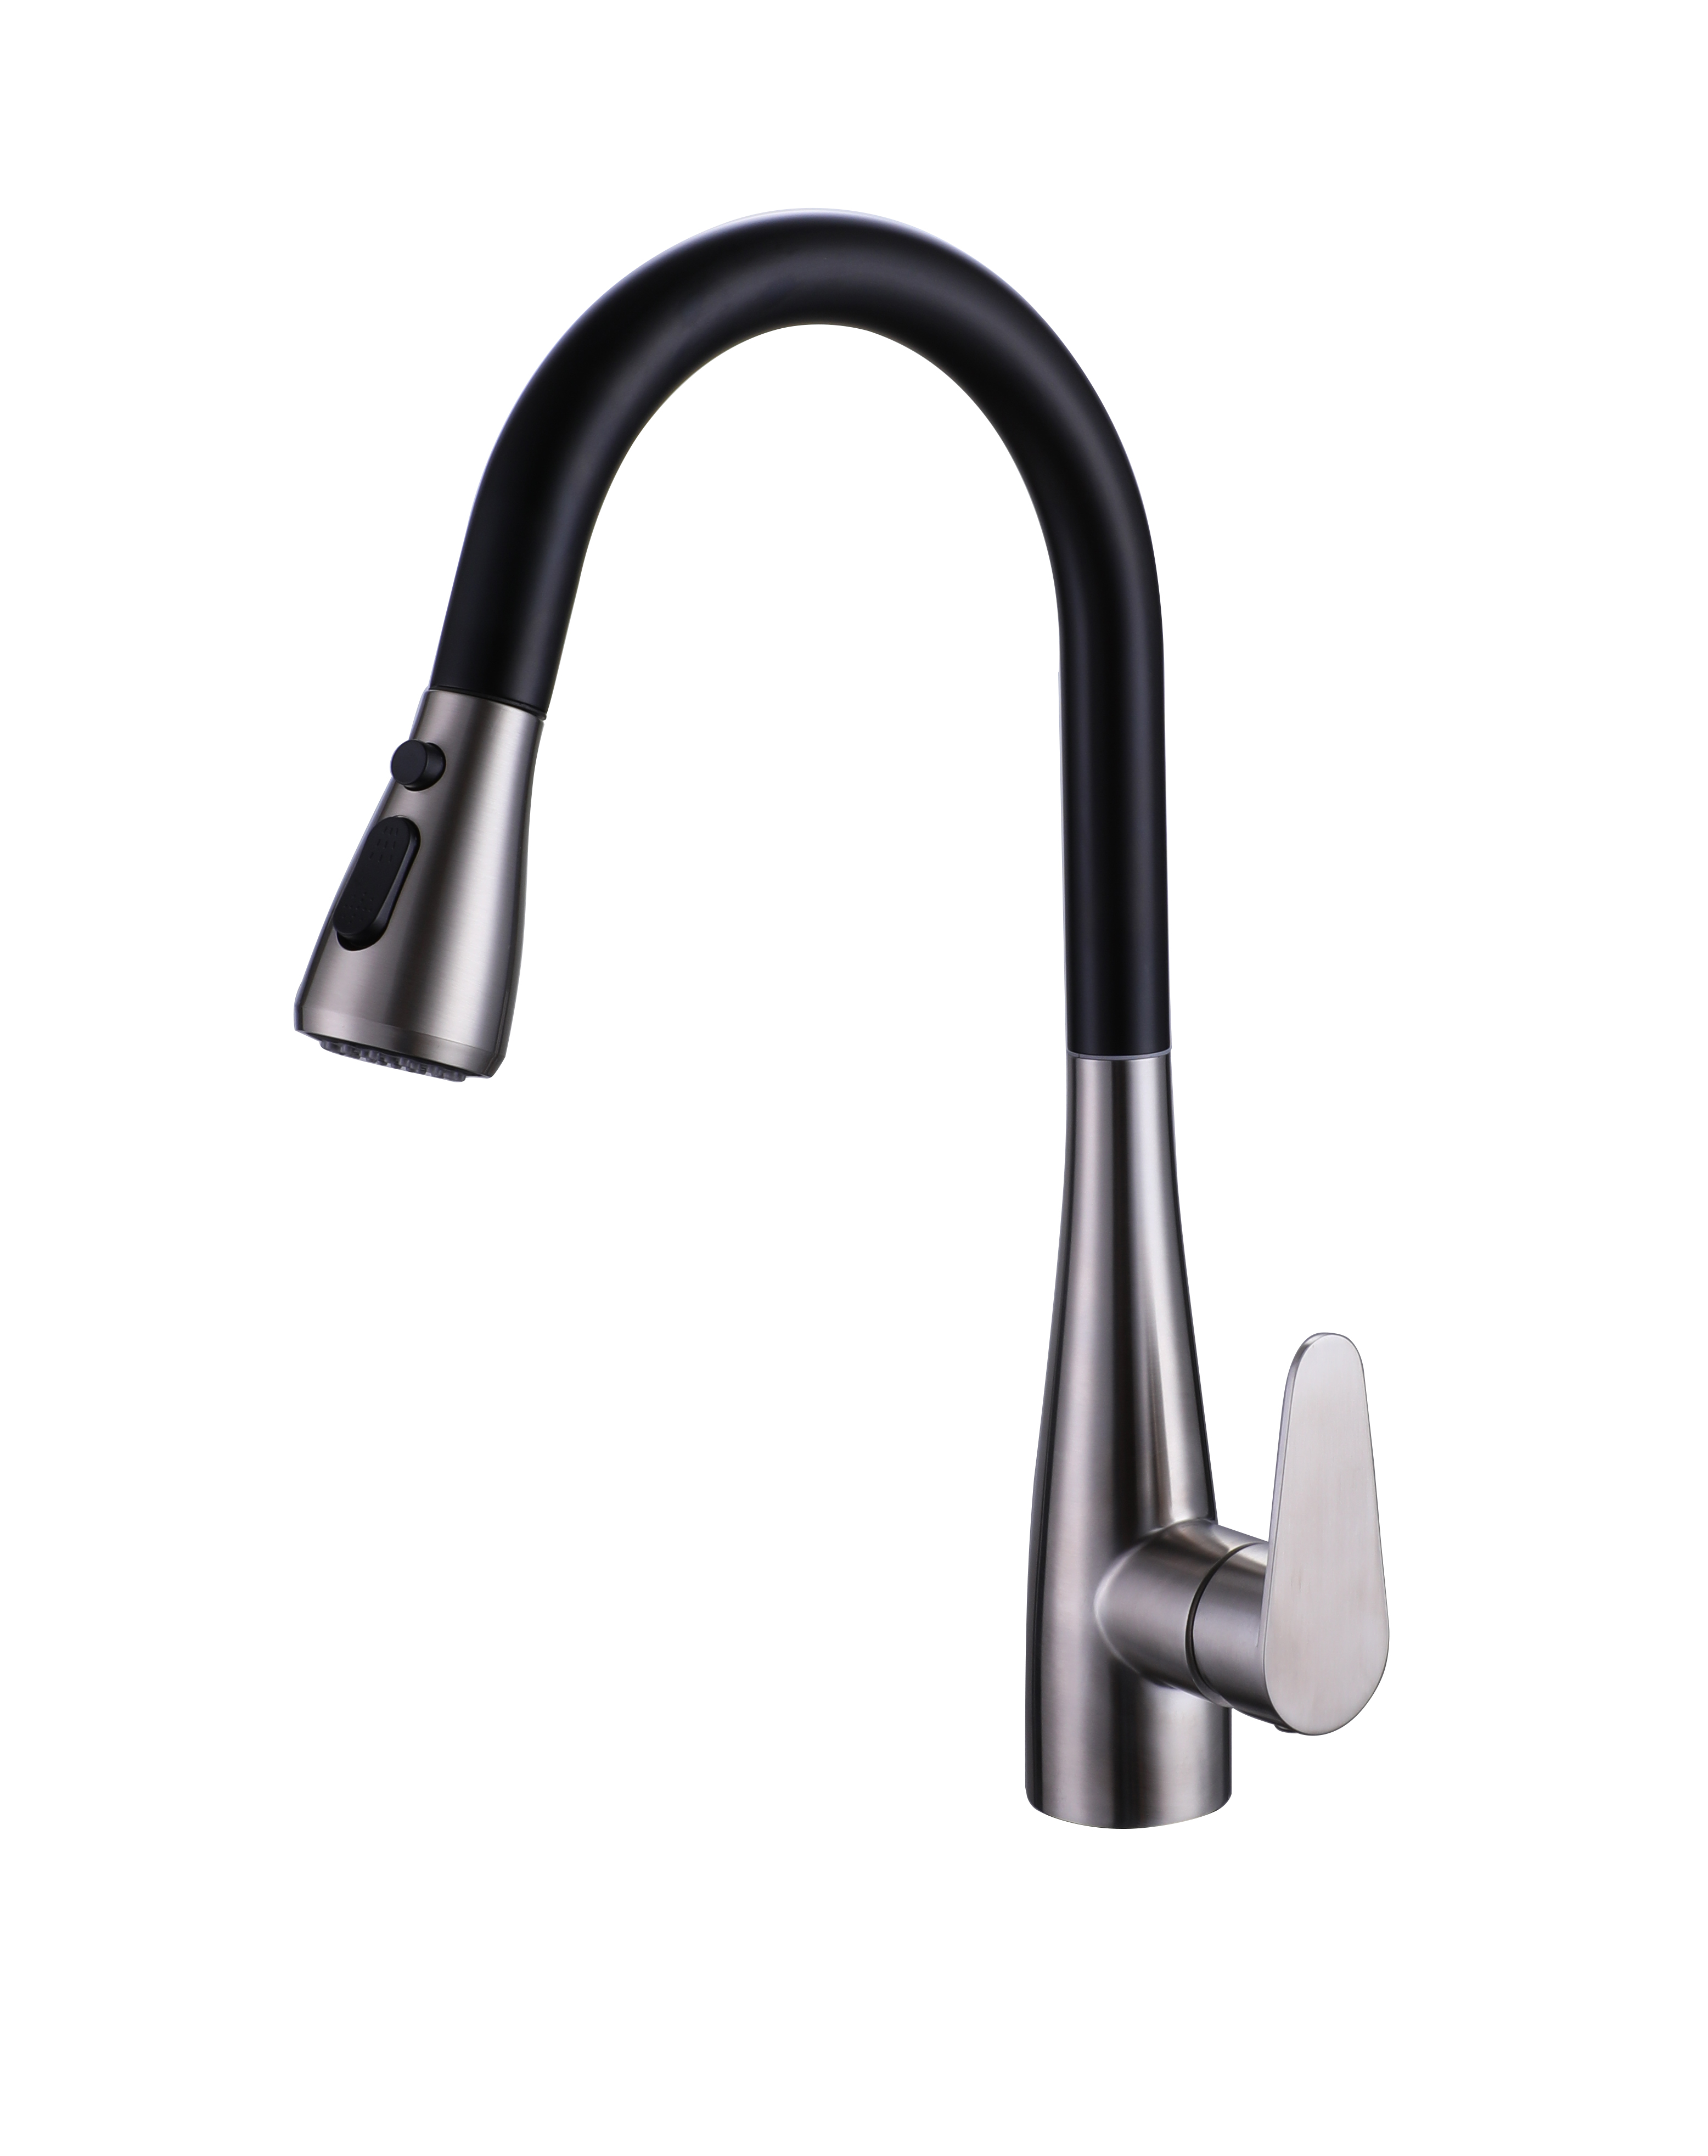 Three function pull out black faucet stainless steel kitchen taps ODM/OEM faucet